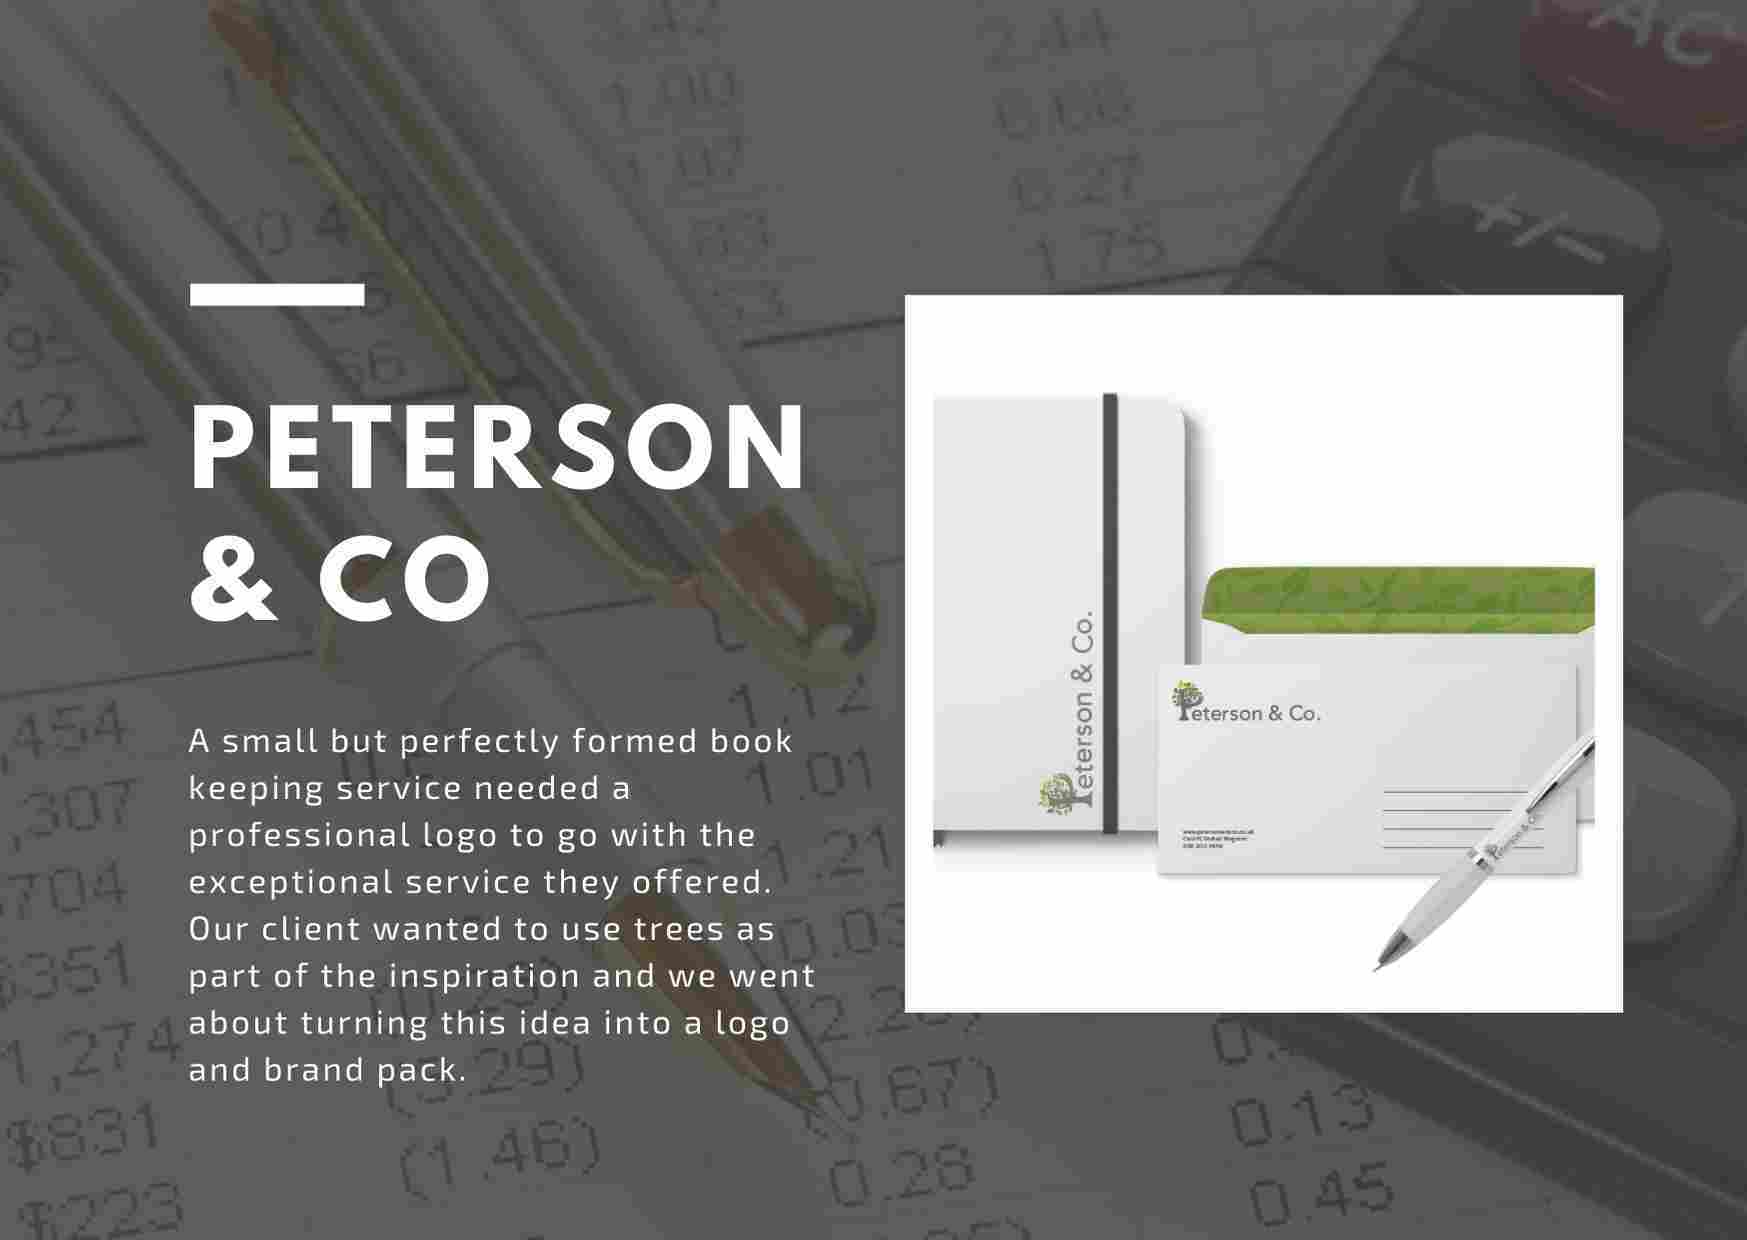 Branding of Peterson & Co including logo creation and brand pack